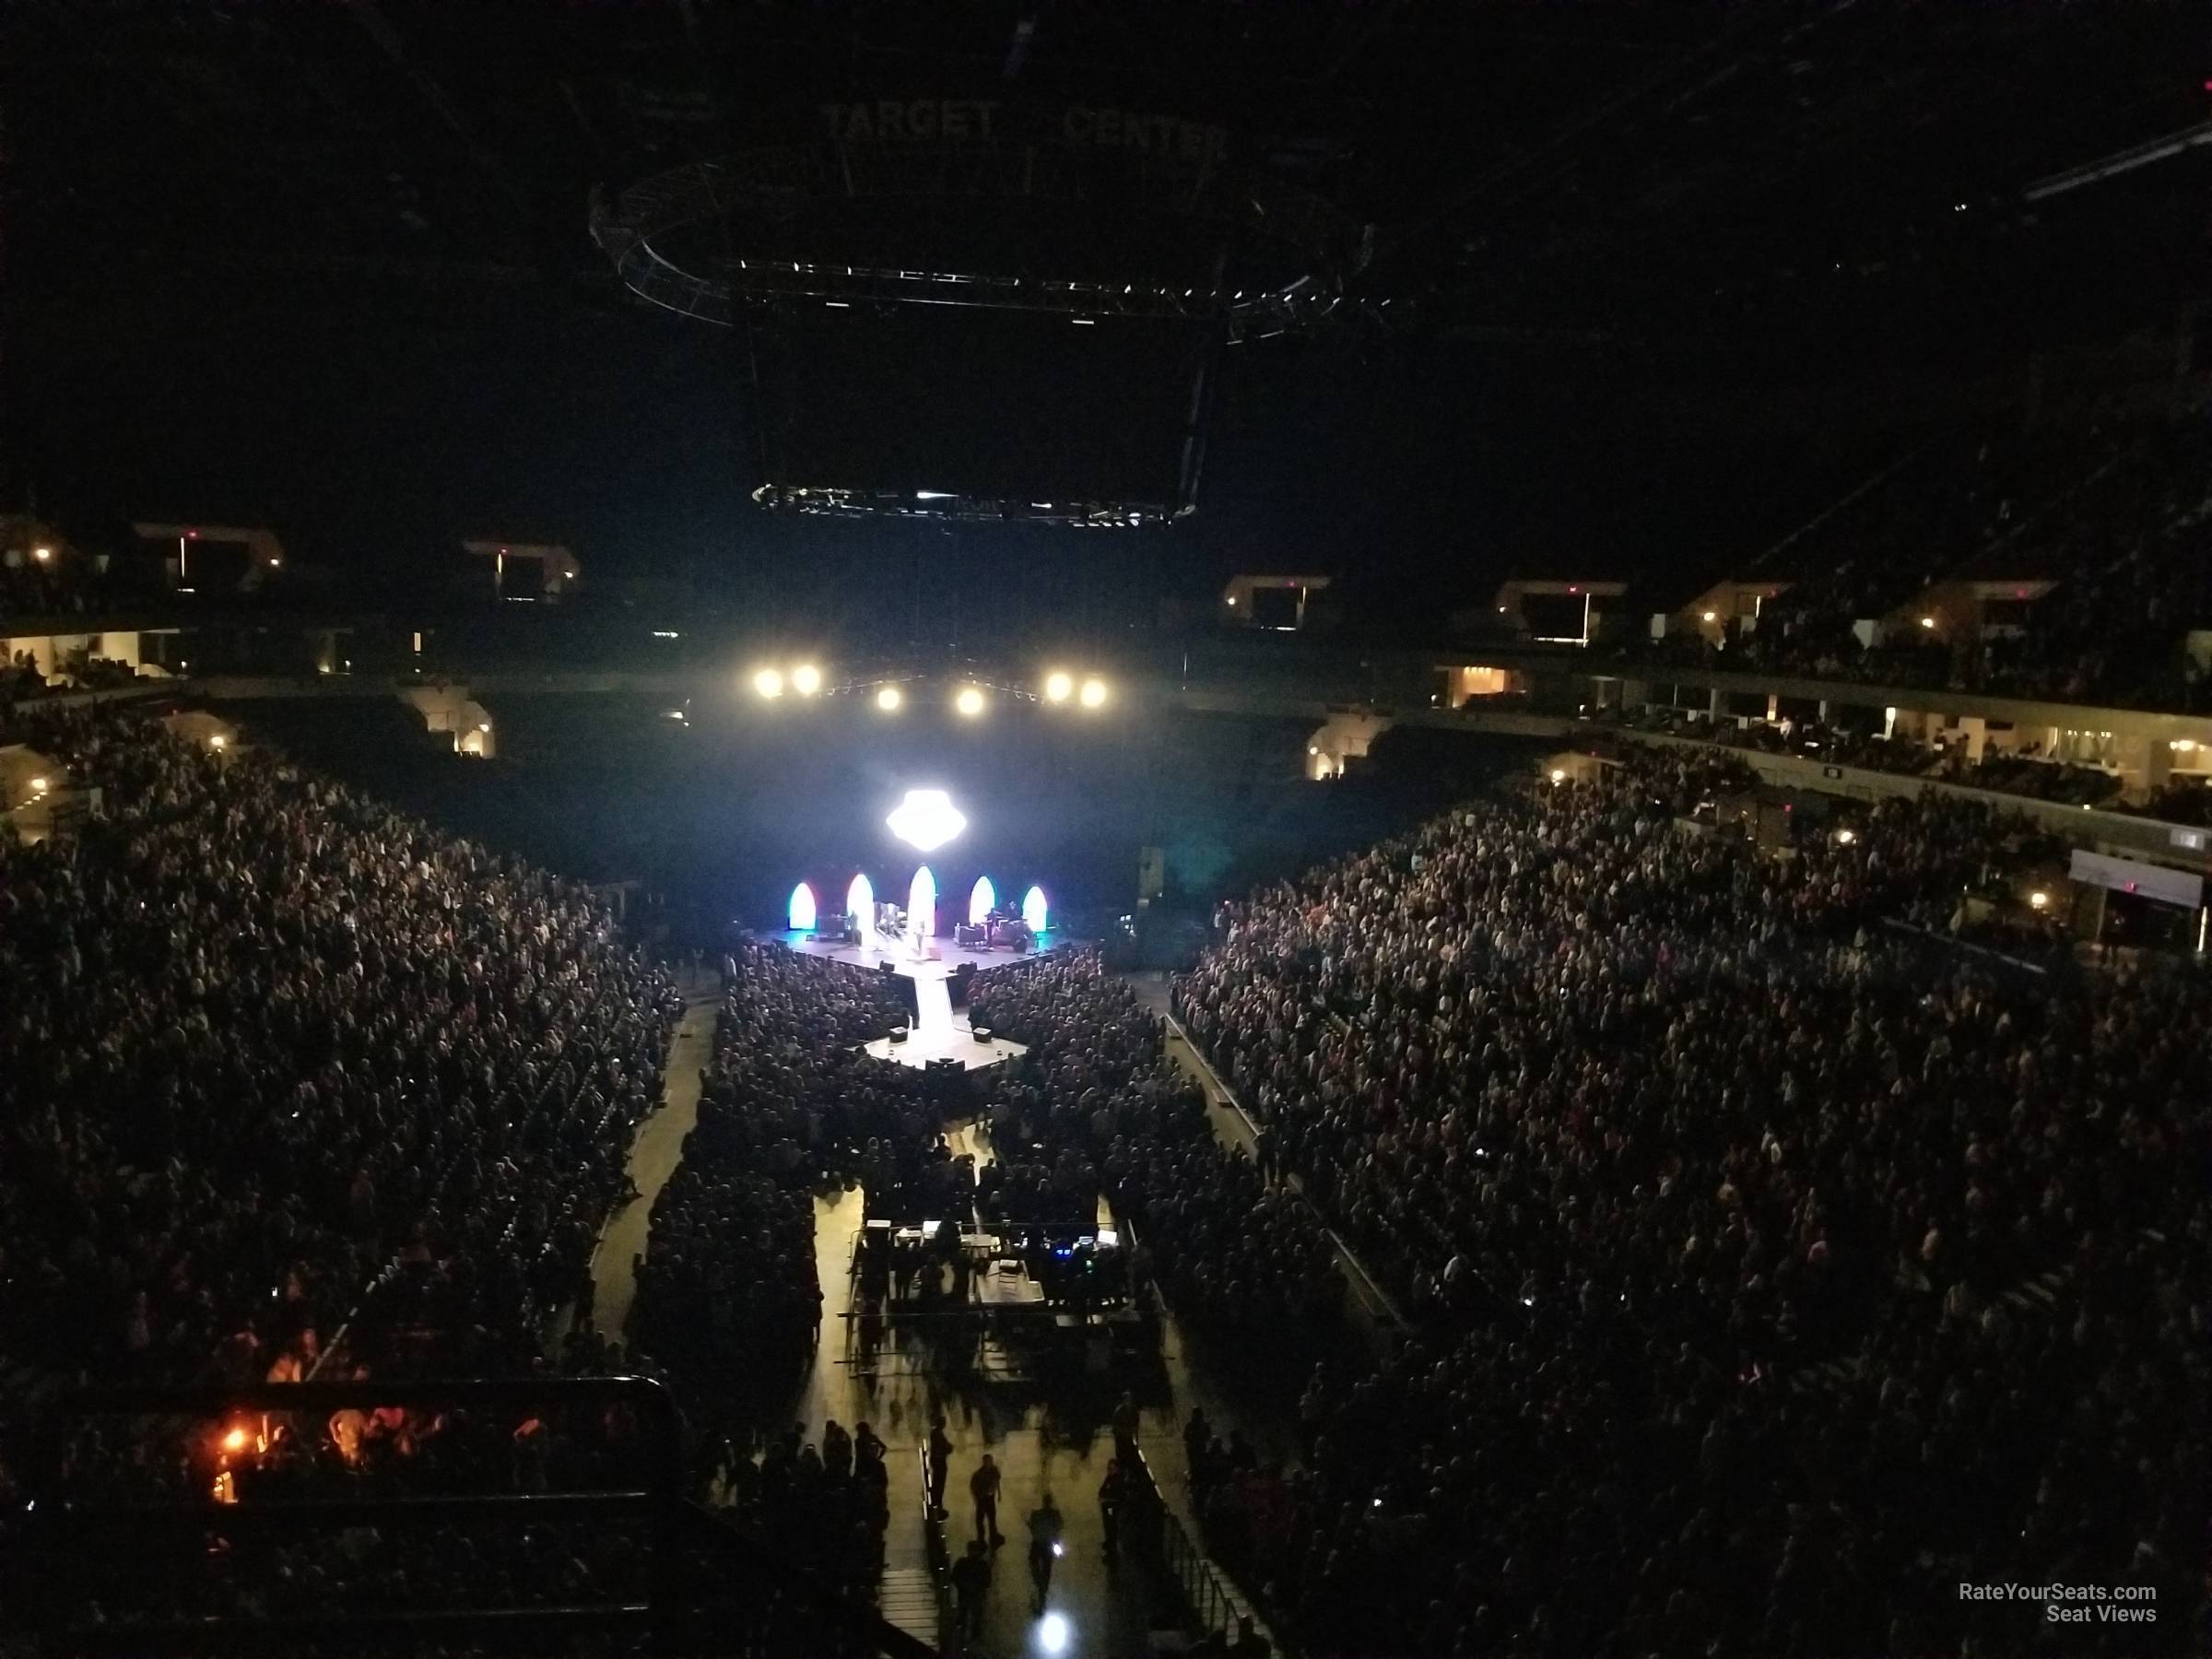 Target Center Seating for Concerts - RateYourSeats.com